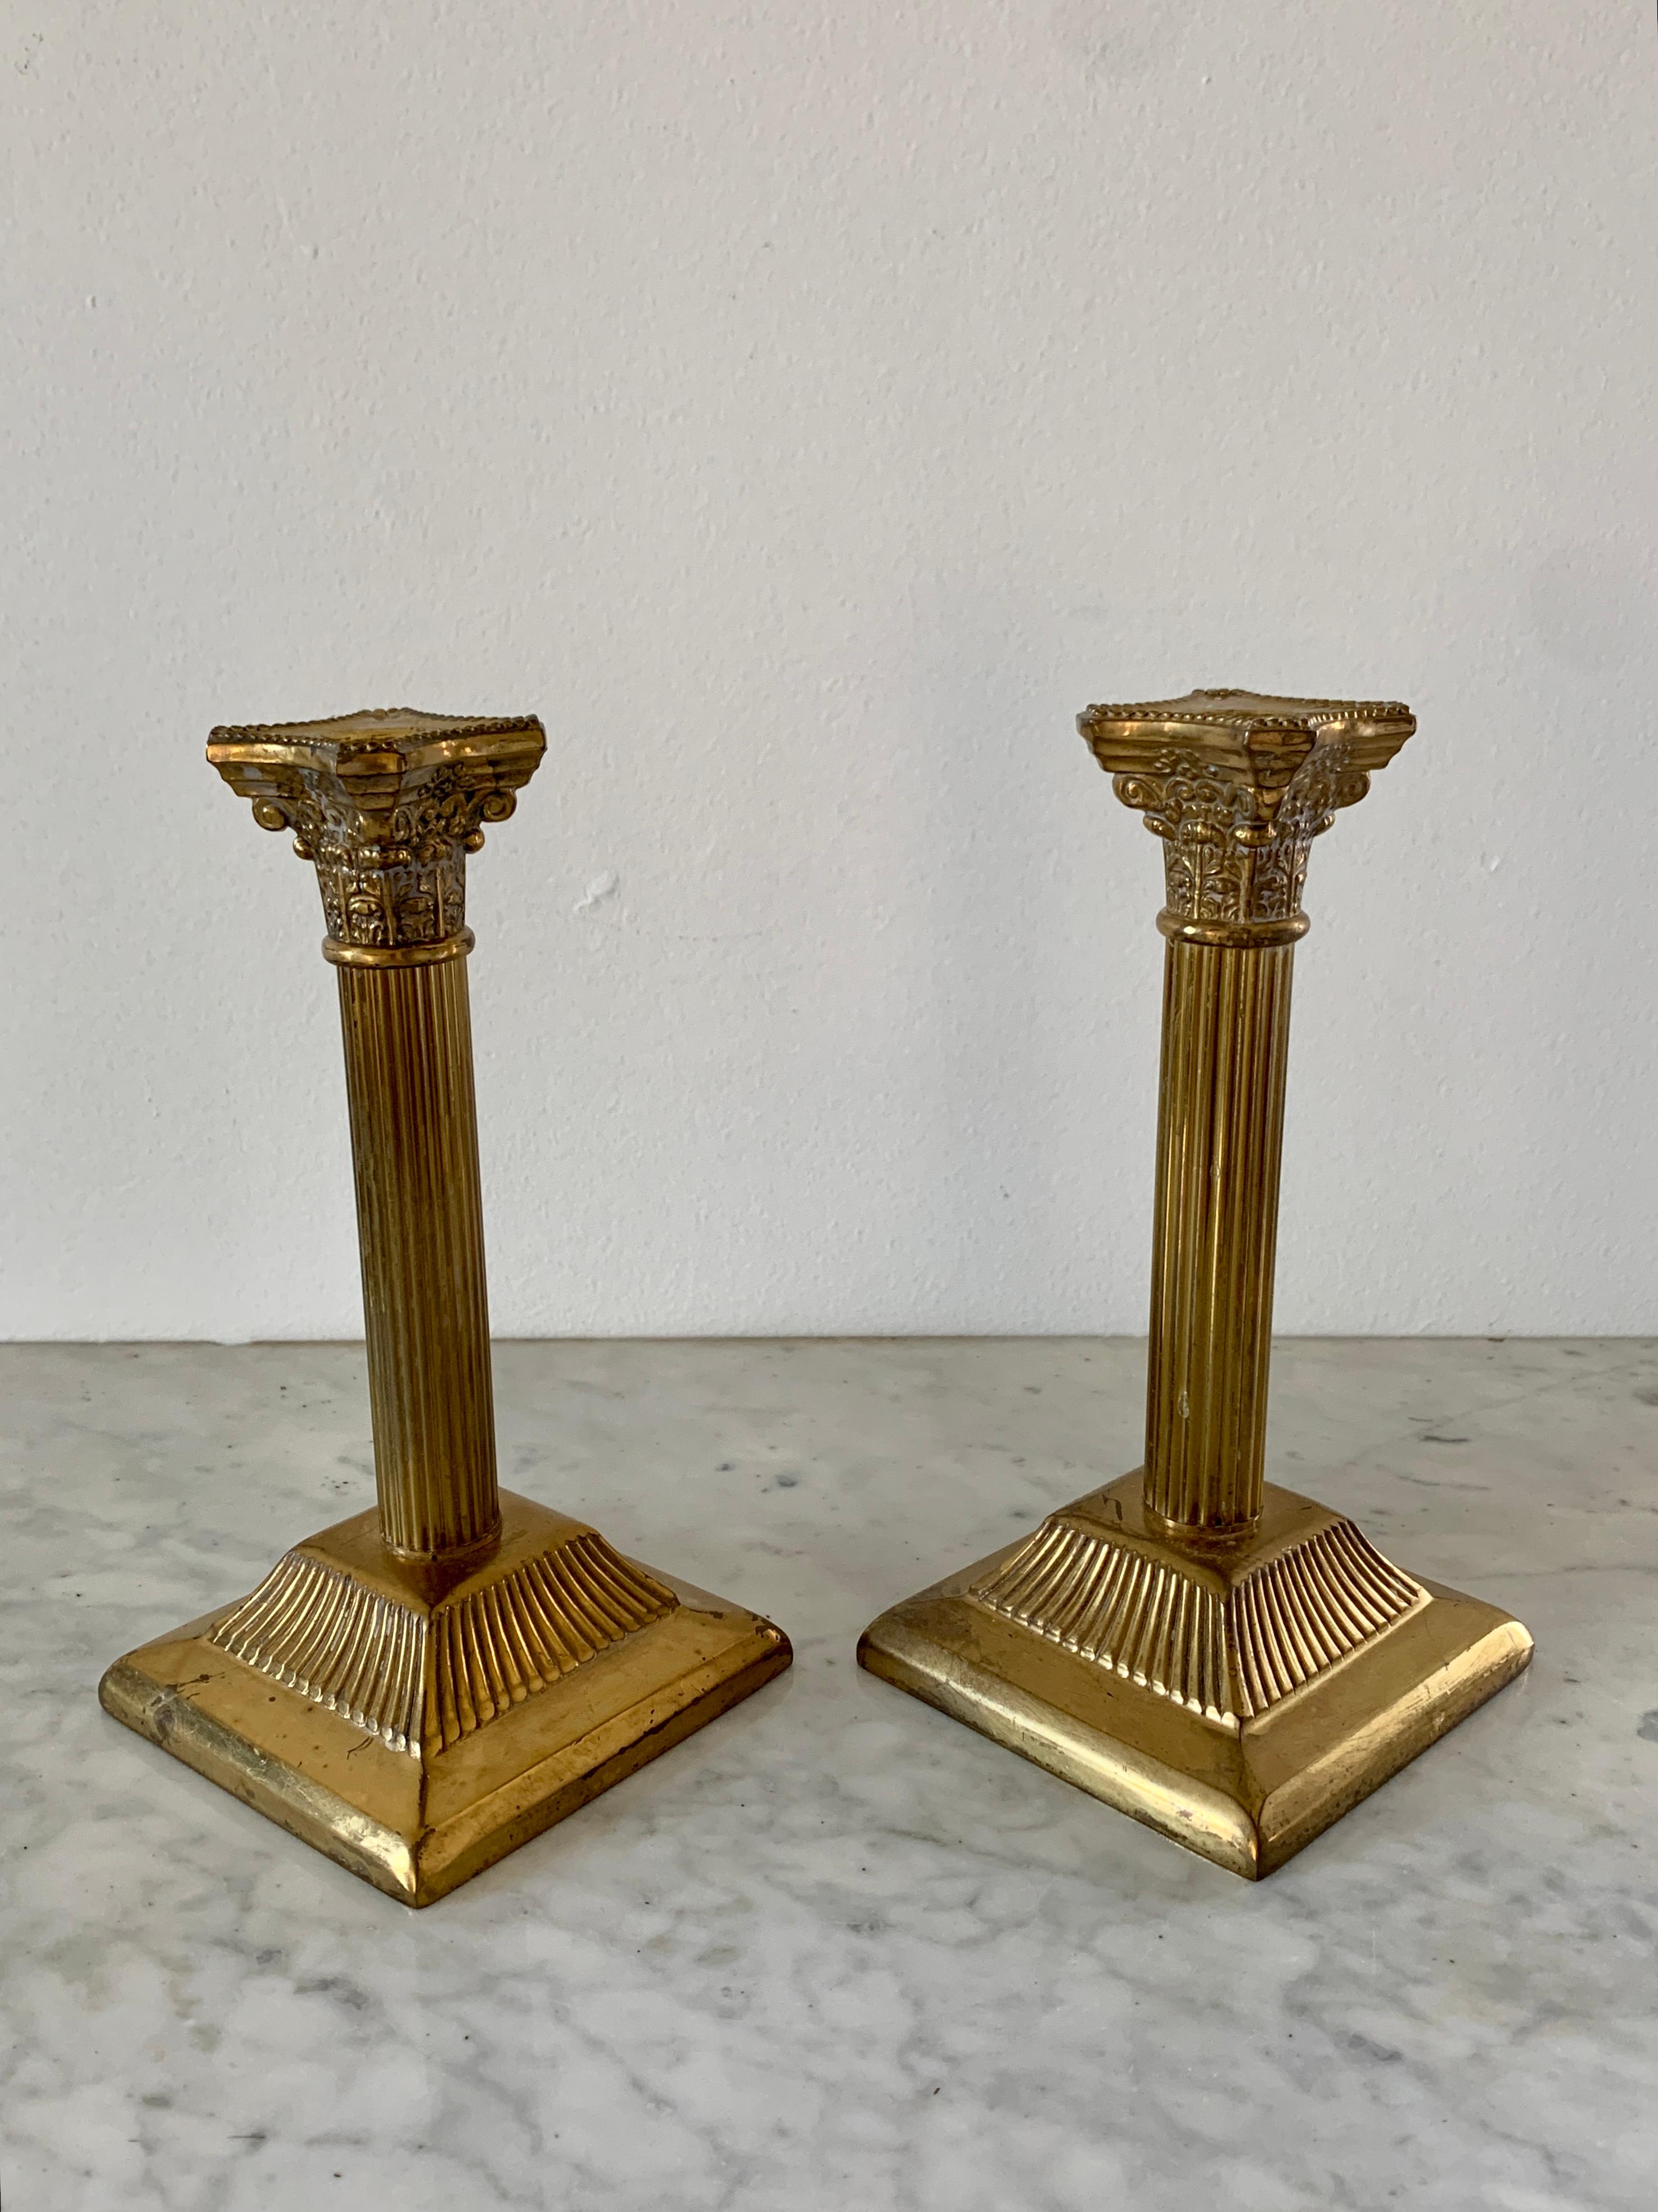 A gorgeous pair of Neoclassical style brass corinthian column candle holders

Circa Mid-20th Century

Measures: 4.25